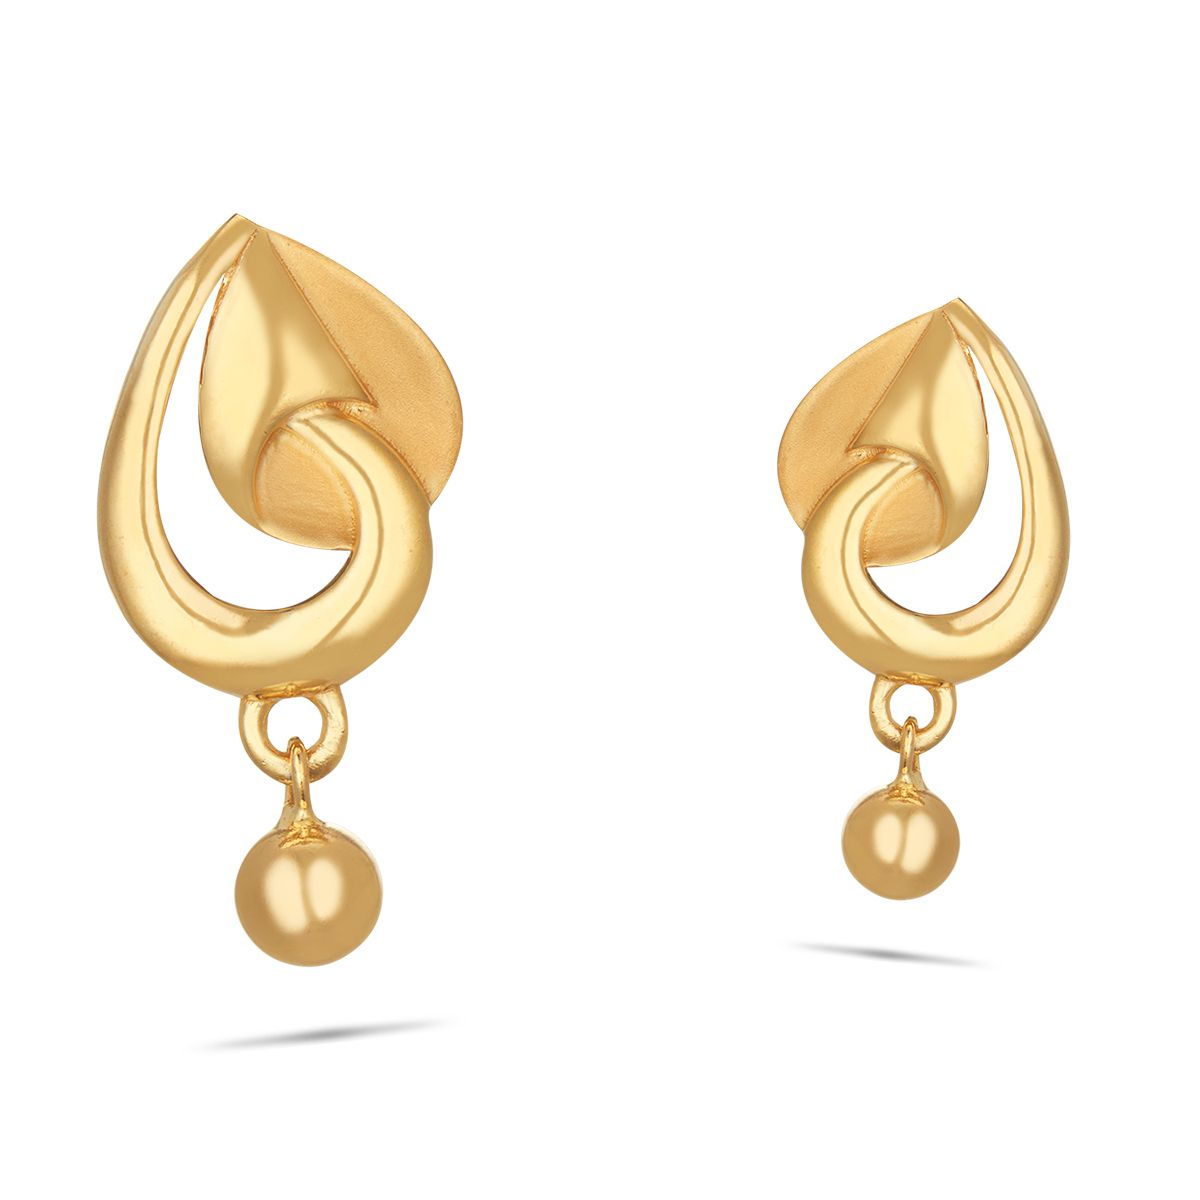 Update more than 208 daily use gold earrings designs best